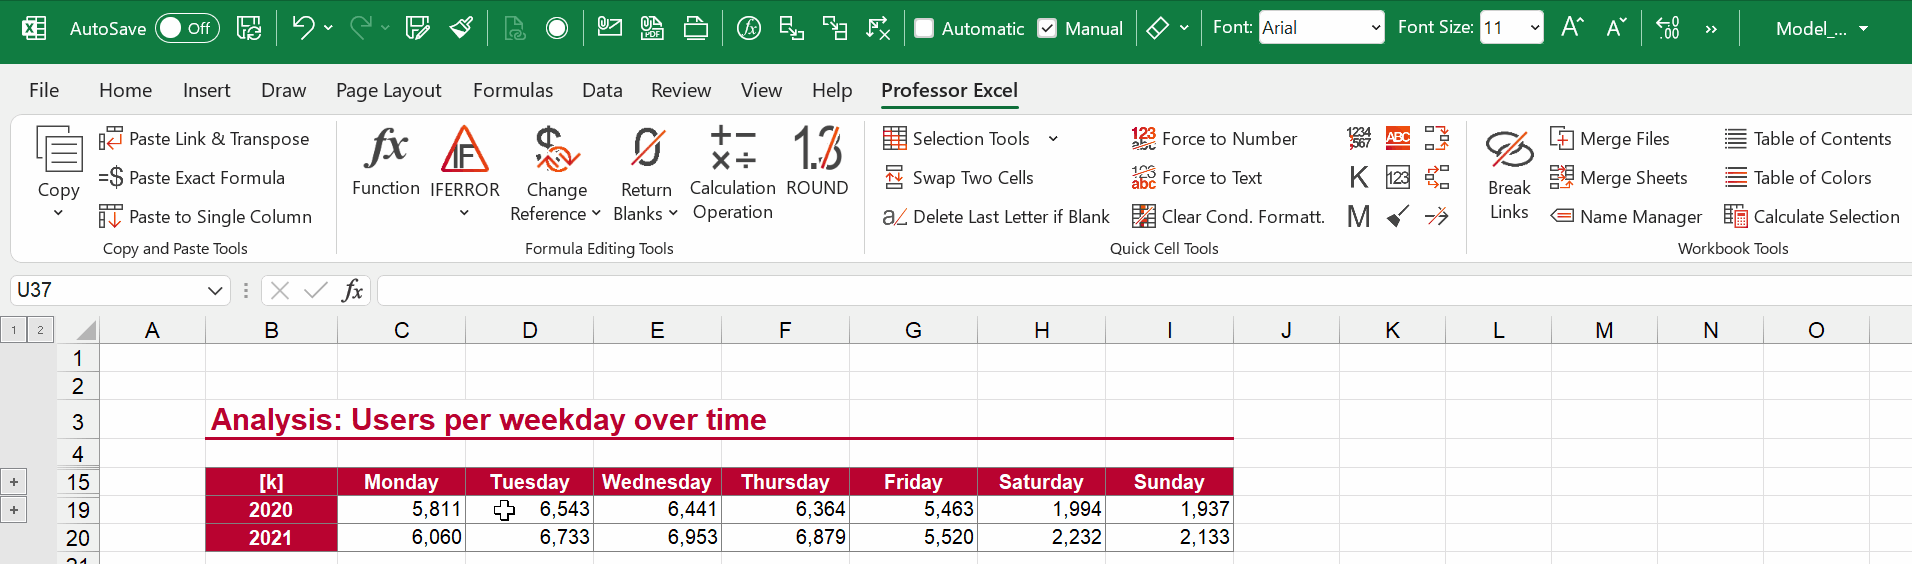 Use Professor Excel Tools to calculate selected cells only.